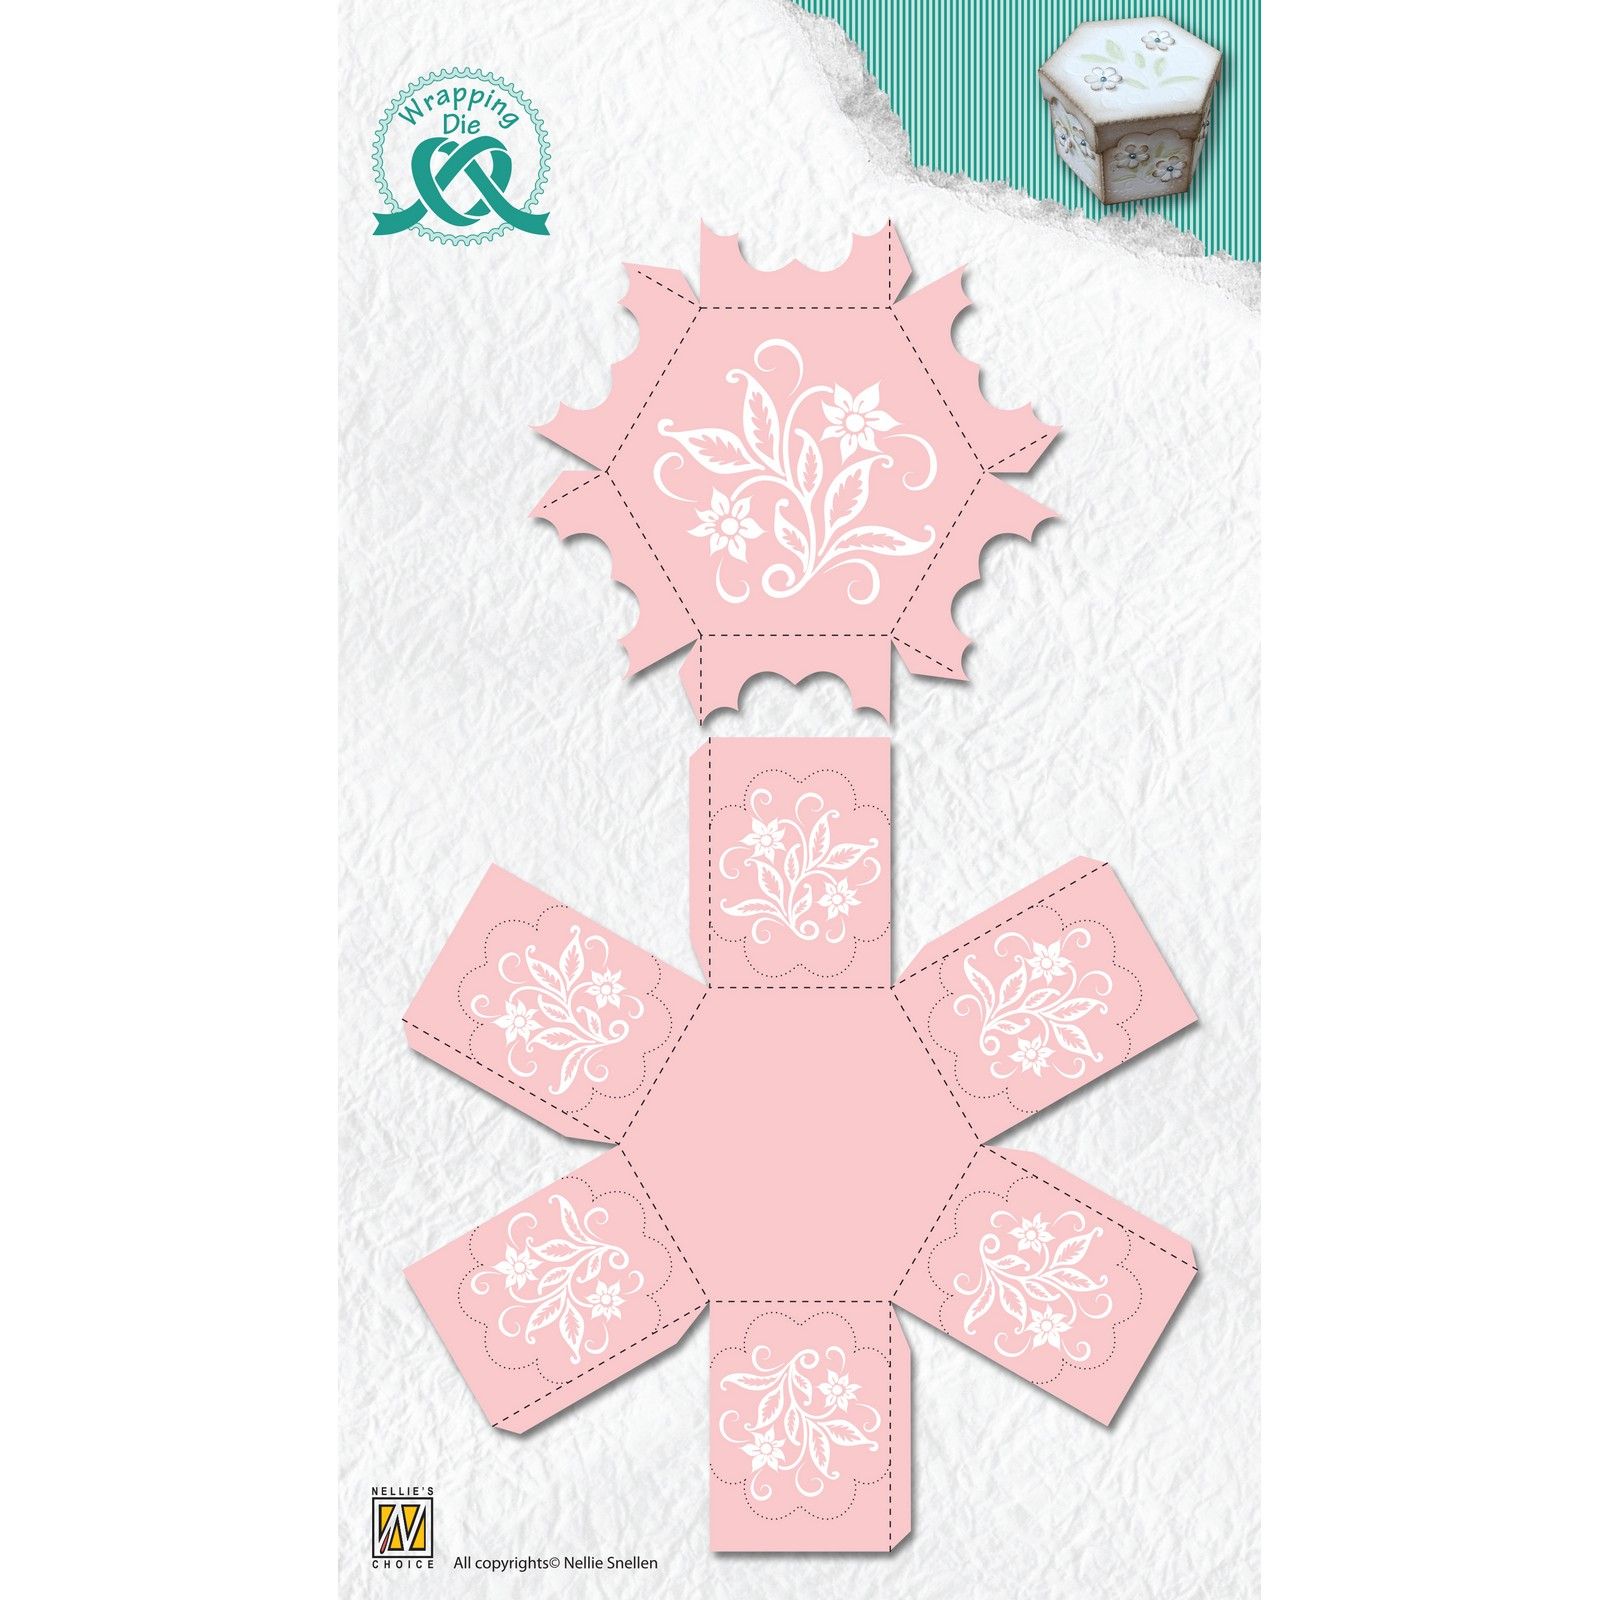 Nellie's Choice • Wrapping Dies Gift Box-6 Hexagonal Box With Lid